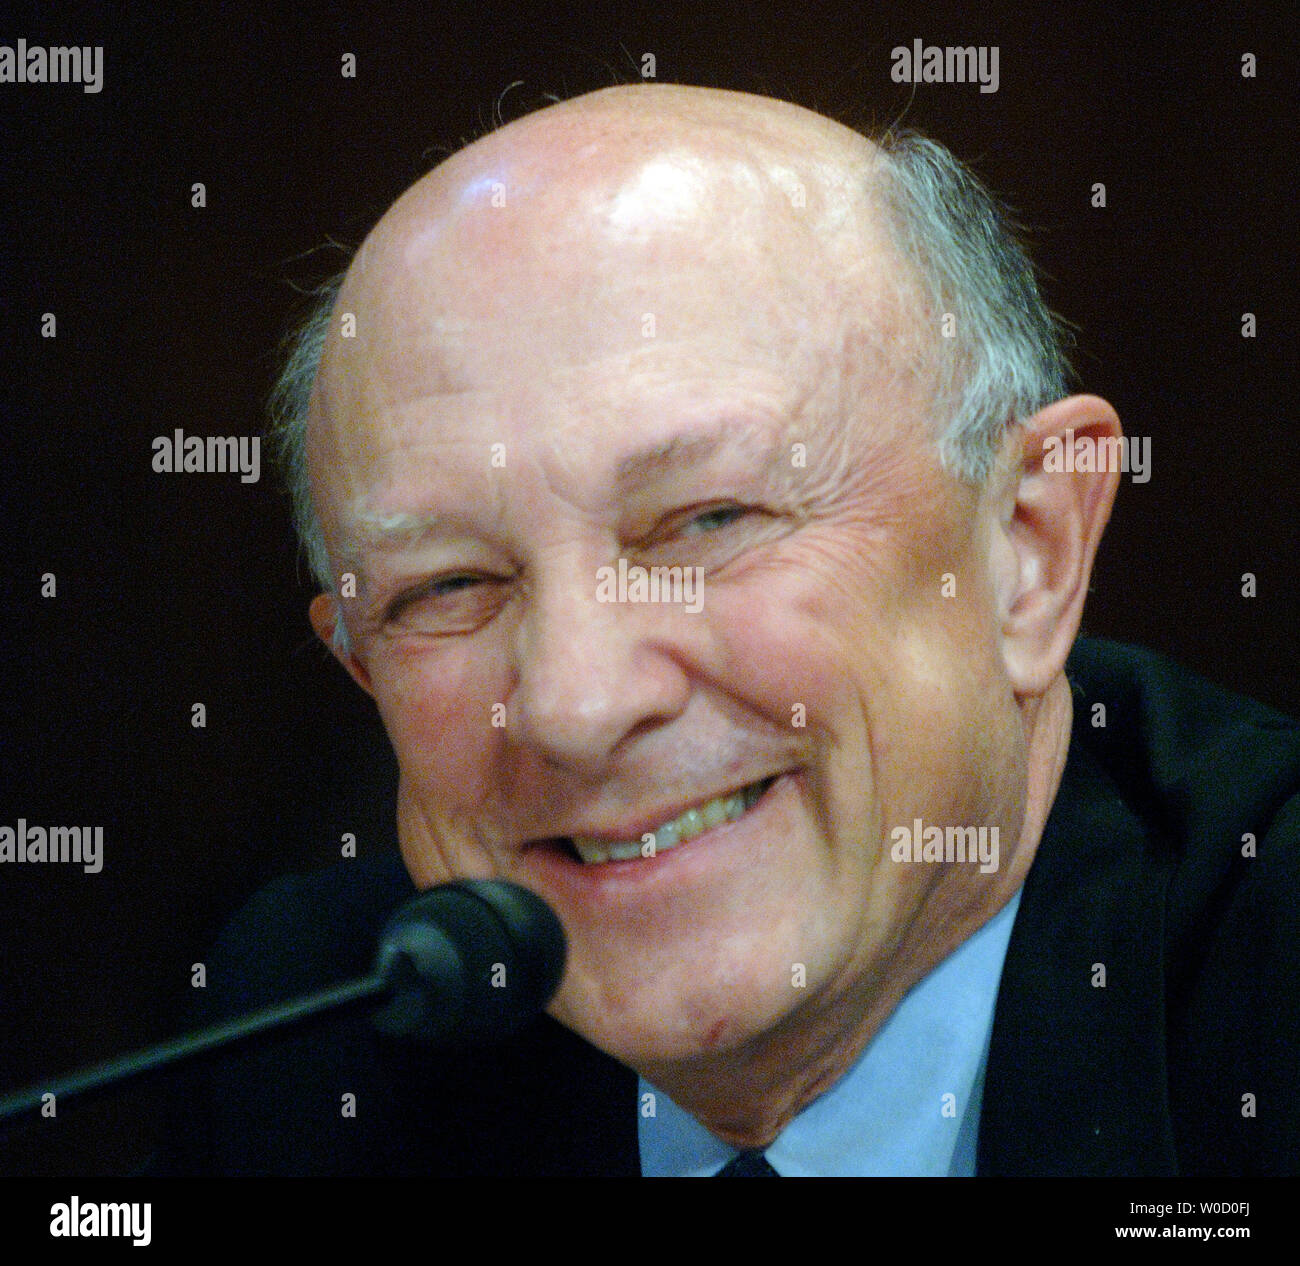 Former CIA Director James Woolsey testifies before a Senate Judiciary Committee Hearing on the wartime executive power and the National Security Agency's surveillance authority, in Washington on February 28, 2006. (UPI Photo/Kevin Dietsch) Stock Photo